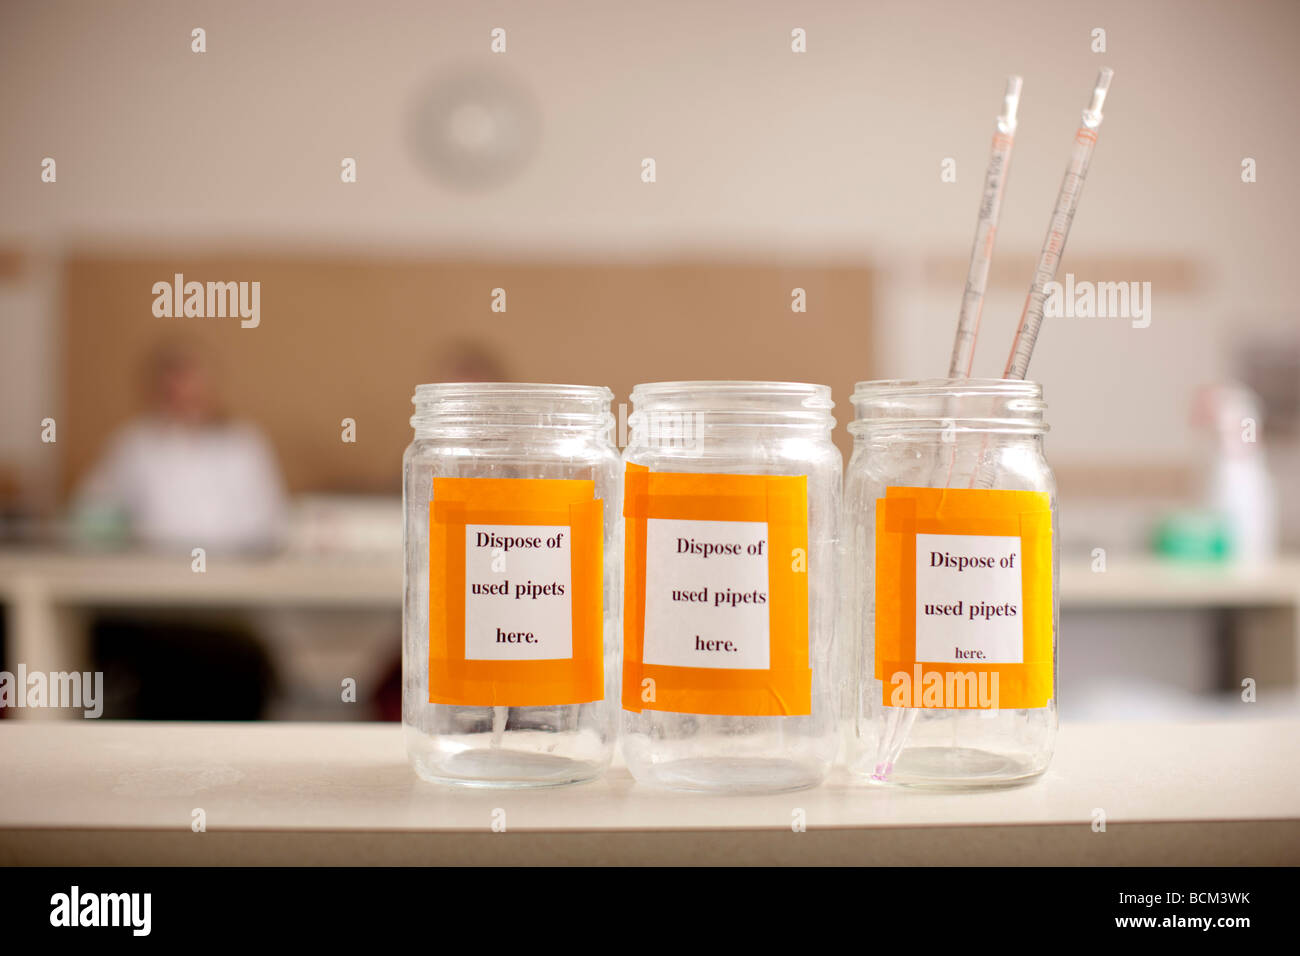 Glass bottles in classroom lab for disposal of Pipets Stock Photo